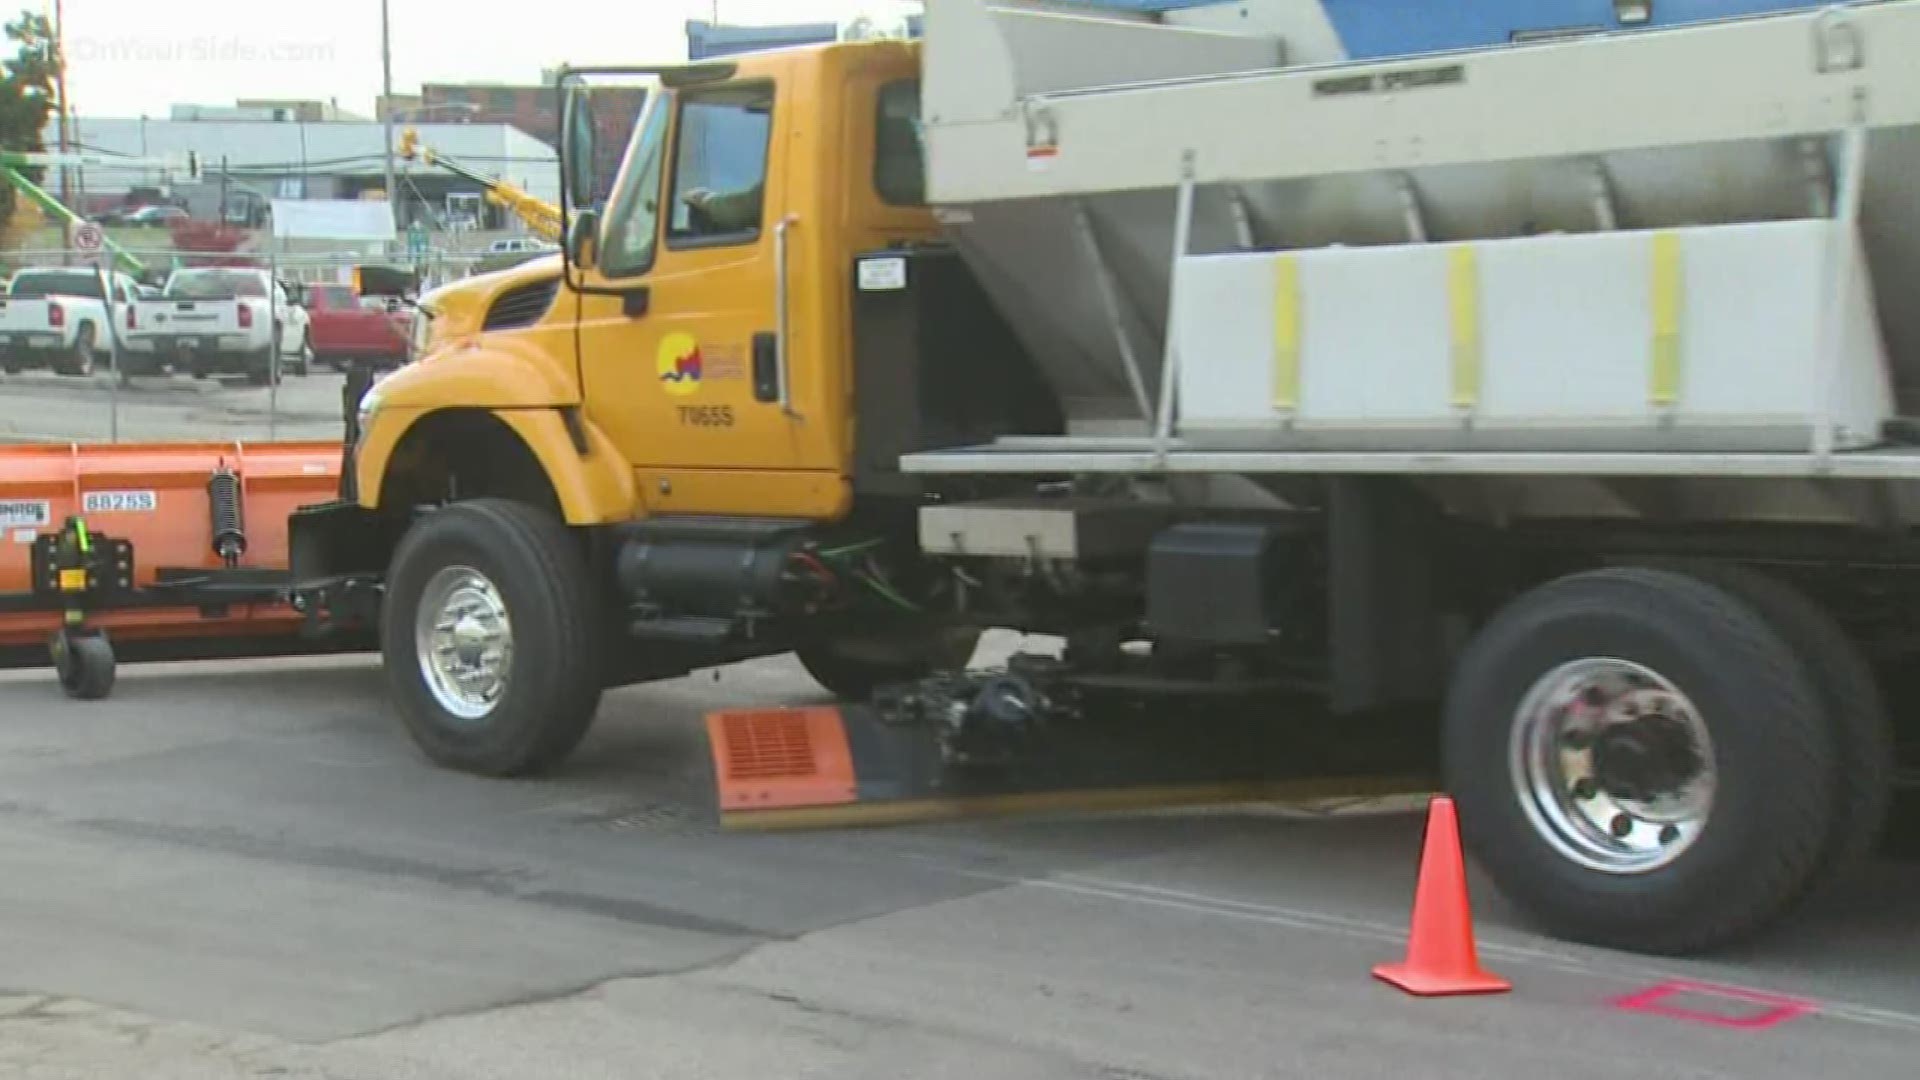 The Snowplow Roadeo is back and happening in Kentwood!